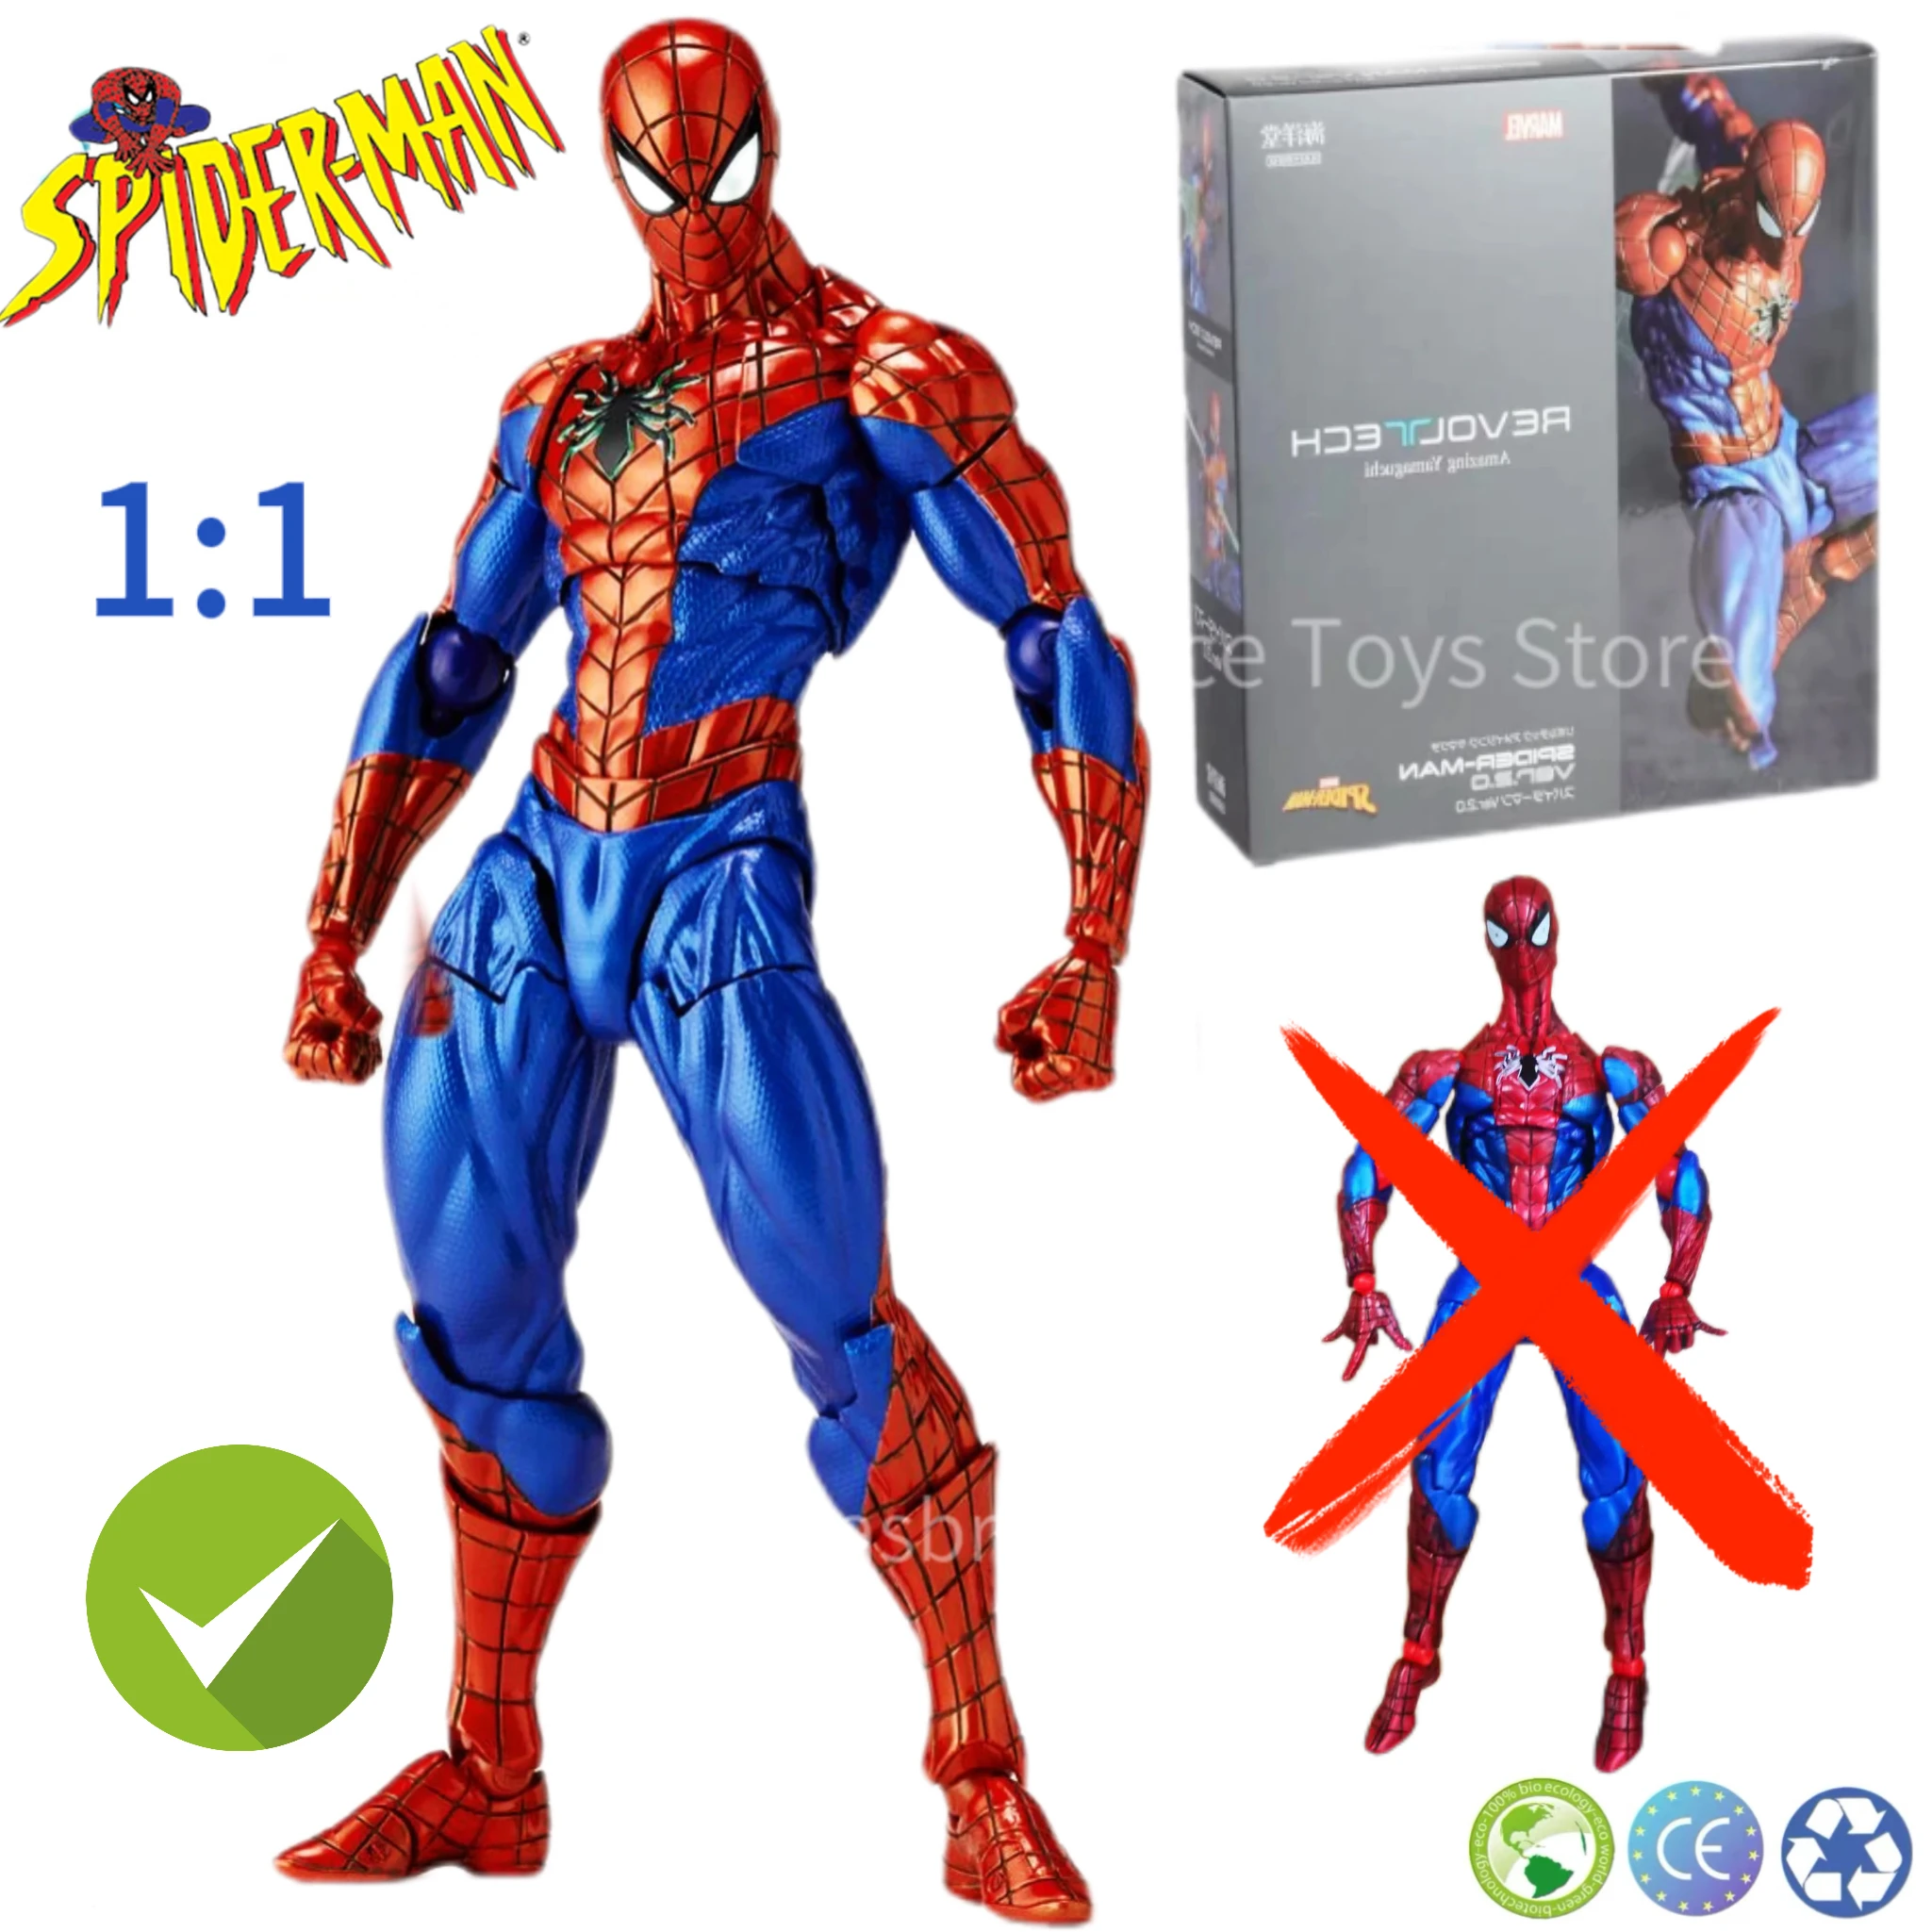 

KAIYODO Marvel Yamaguchi Marvel Spiderman Peter Parker 2.0 Anime Action Figure Toy Gift Model Collection Hobby In Stock